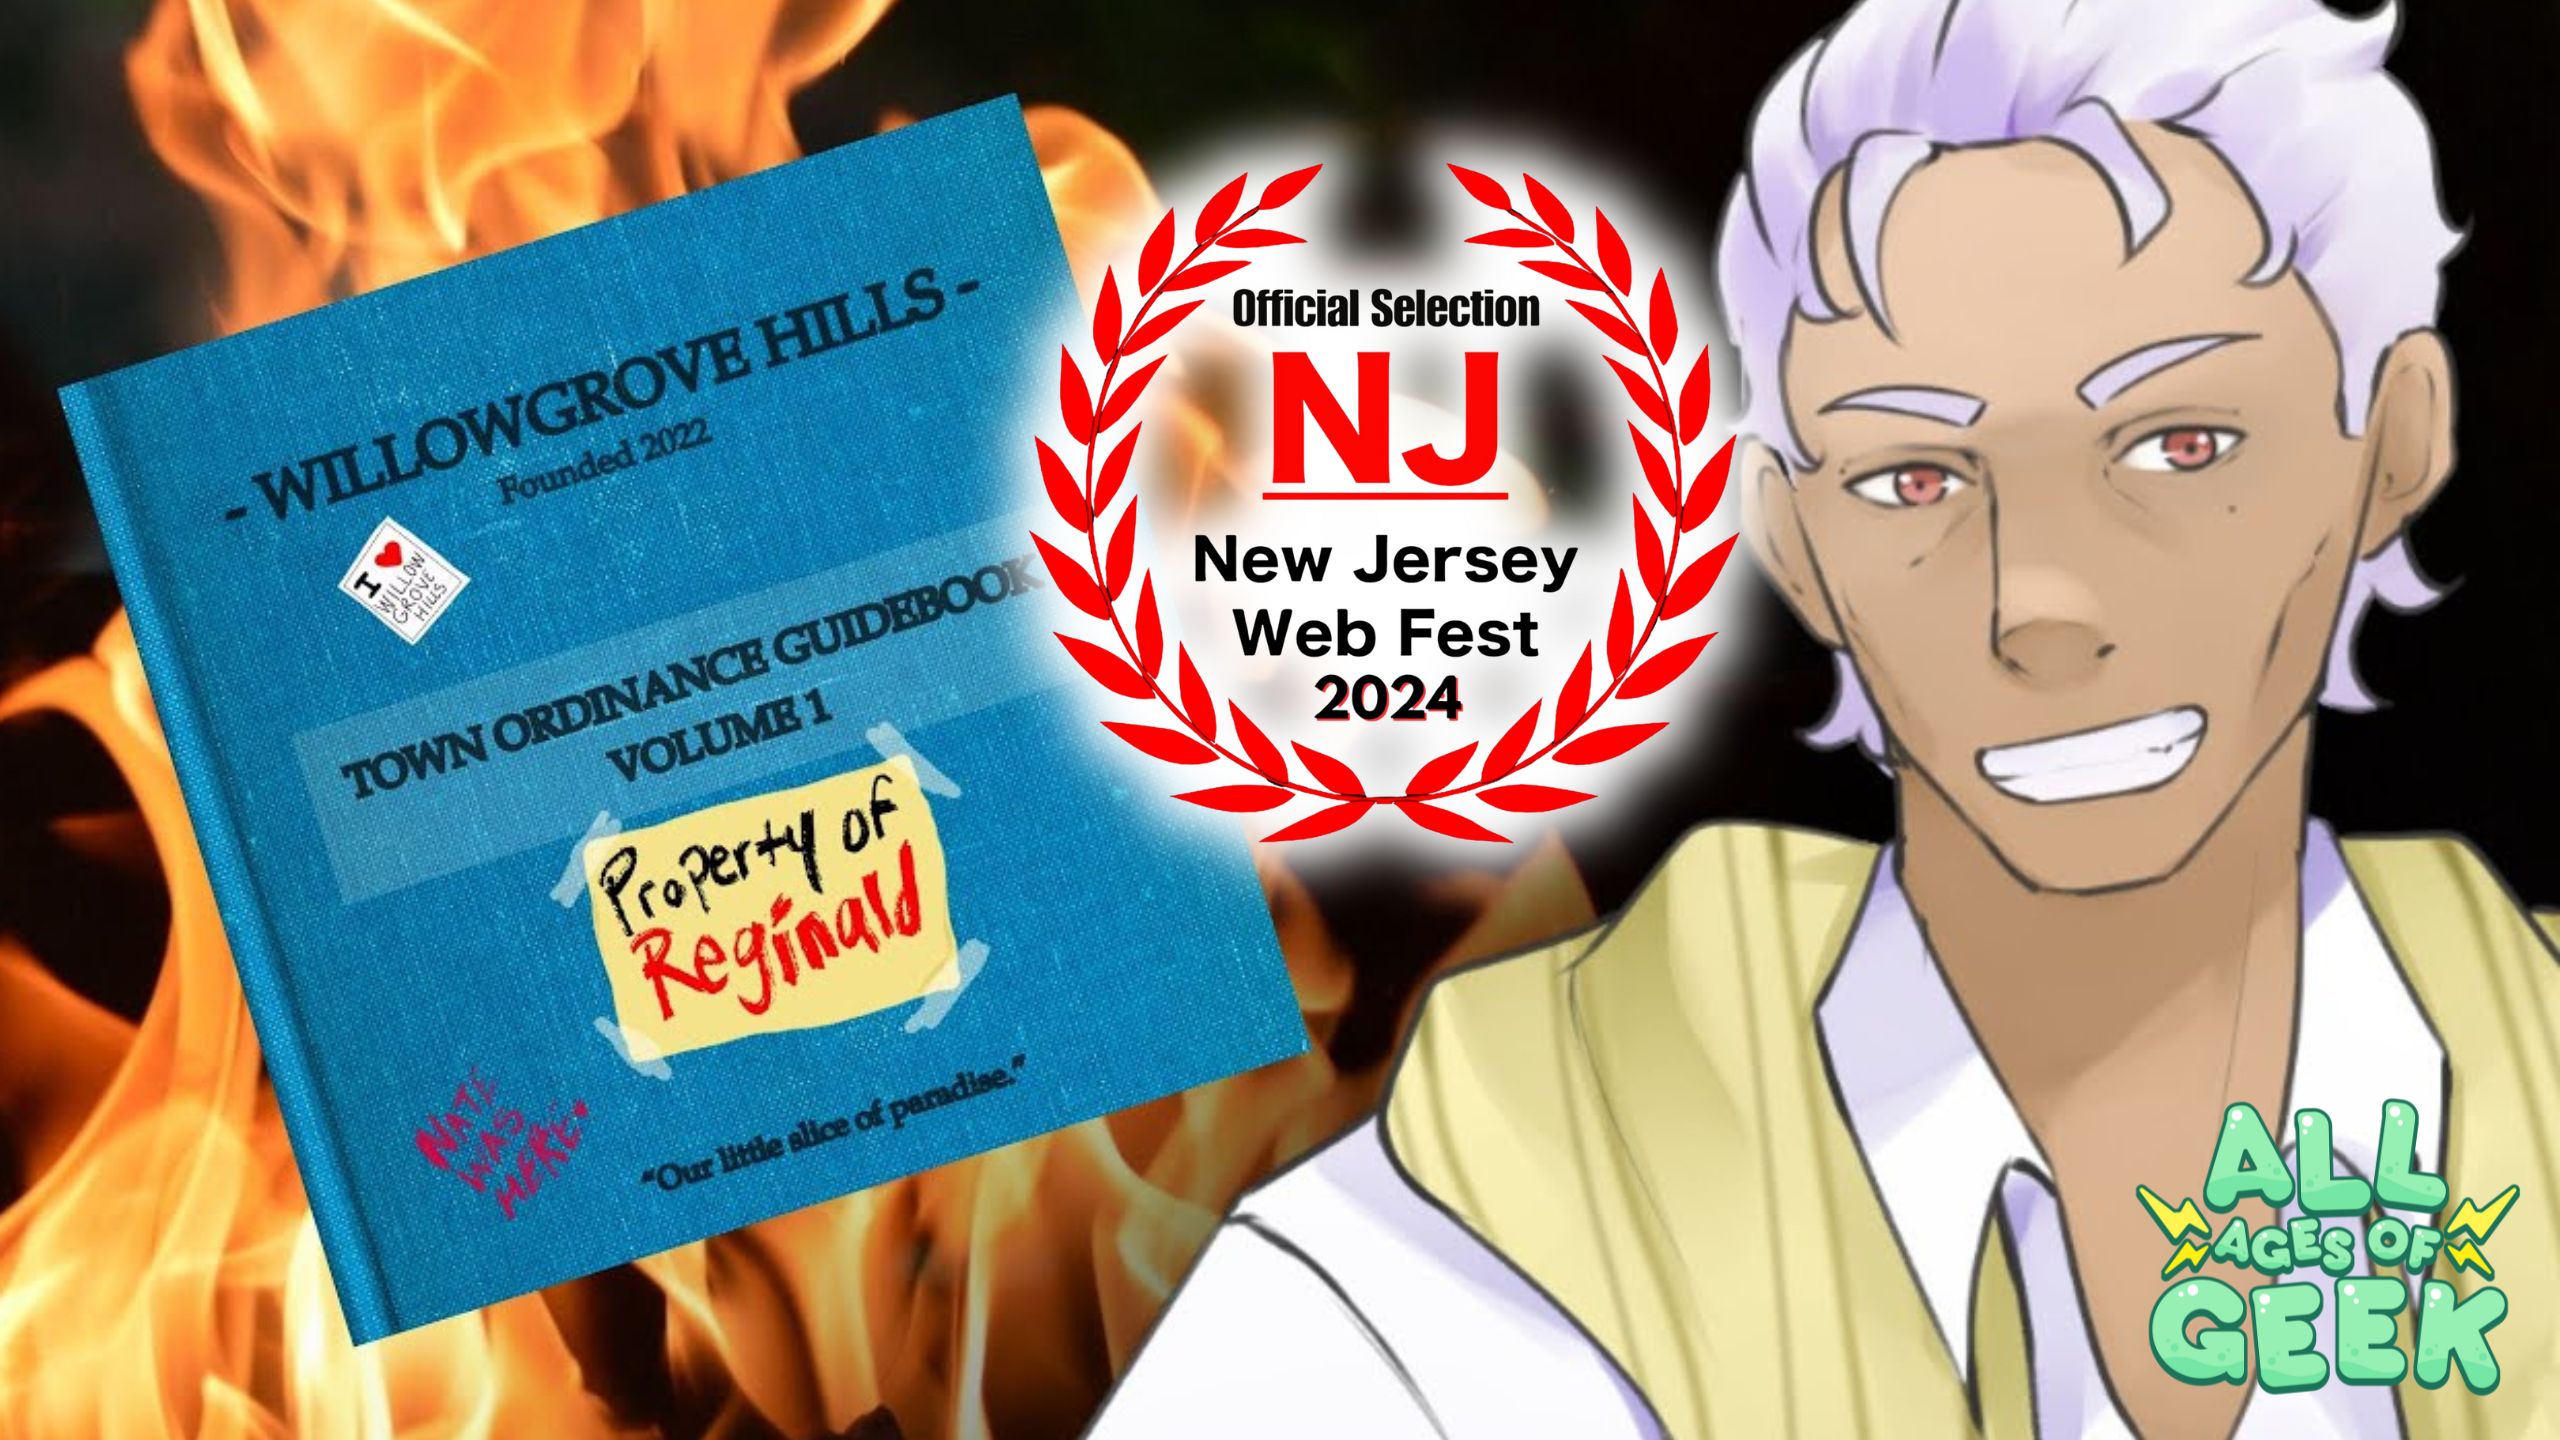 Mayor Reginald’s Rules! from I Married a Monster on a Hill Selected for New Jersey Web Fest 2024!